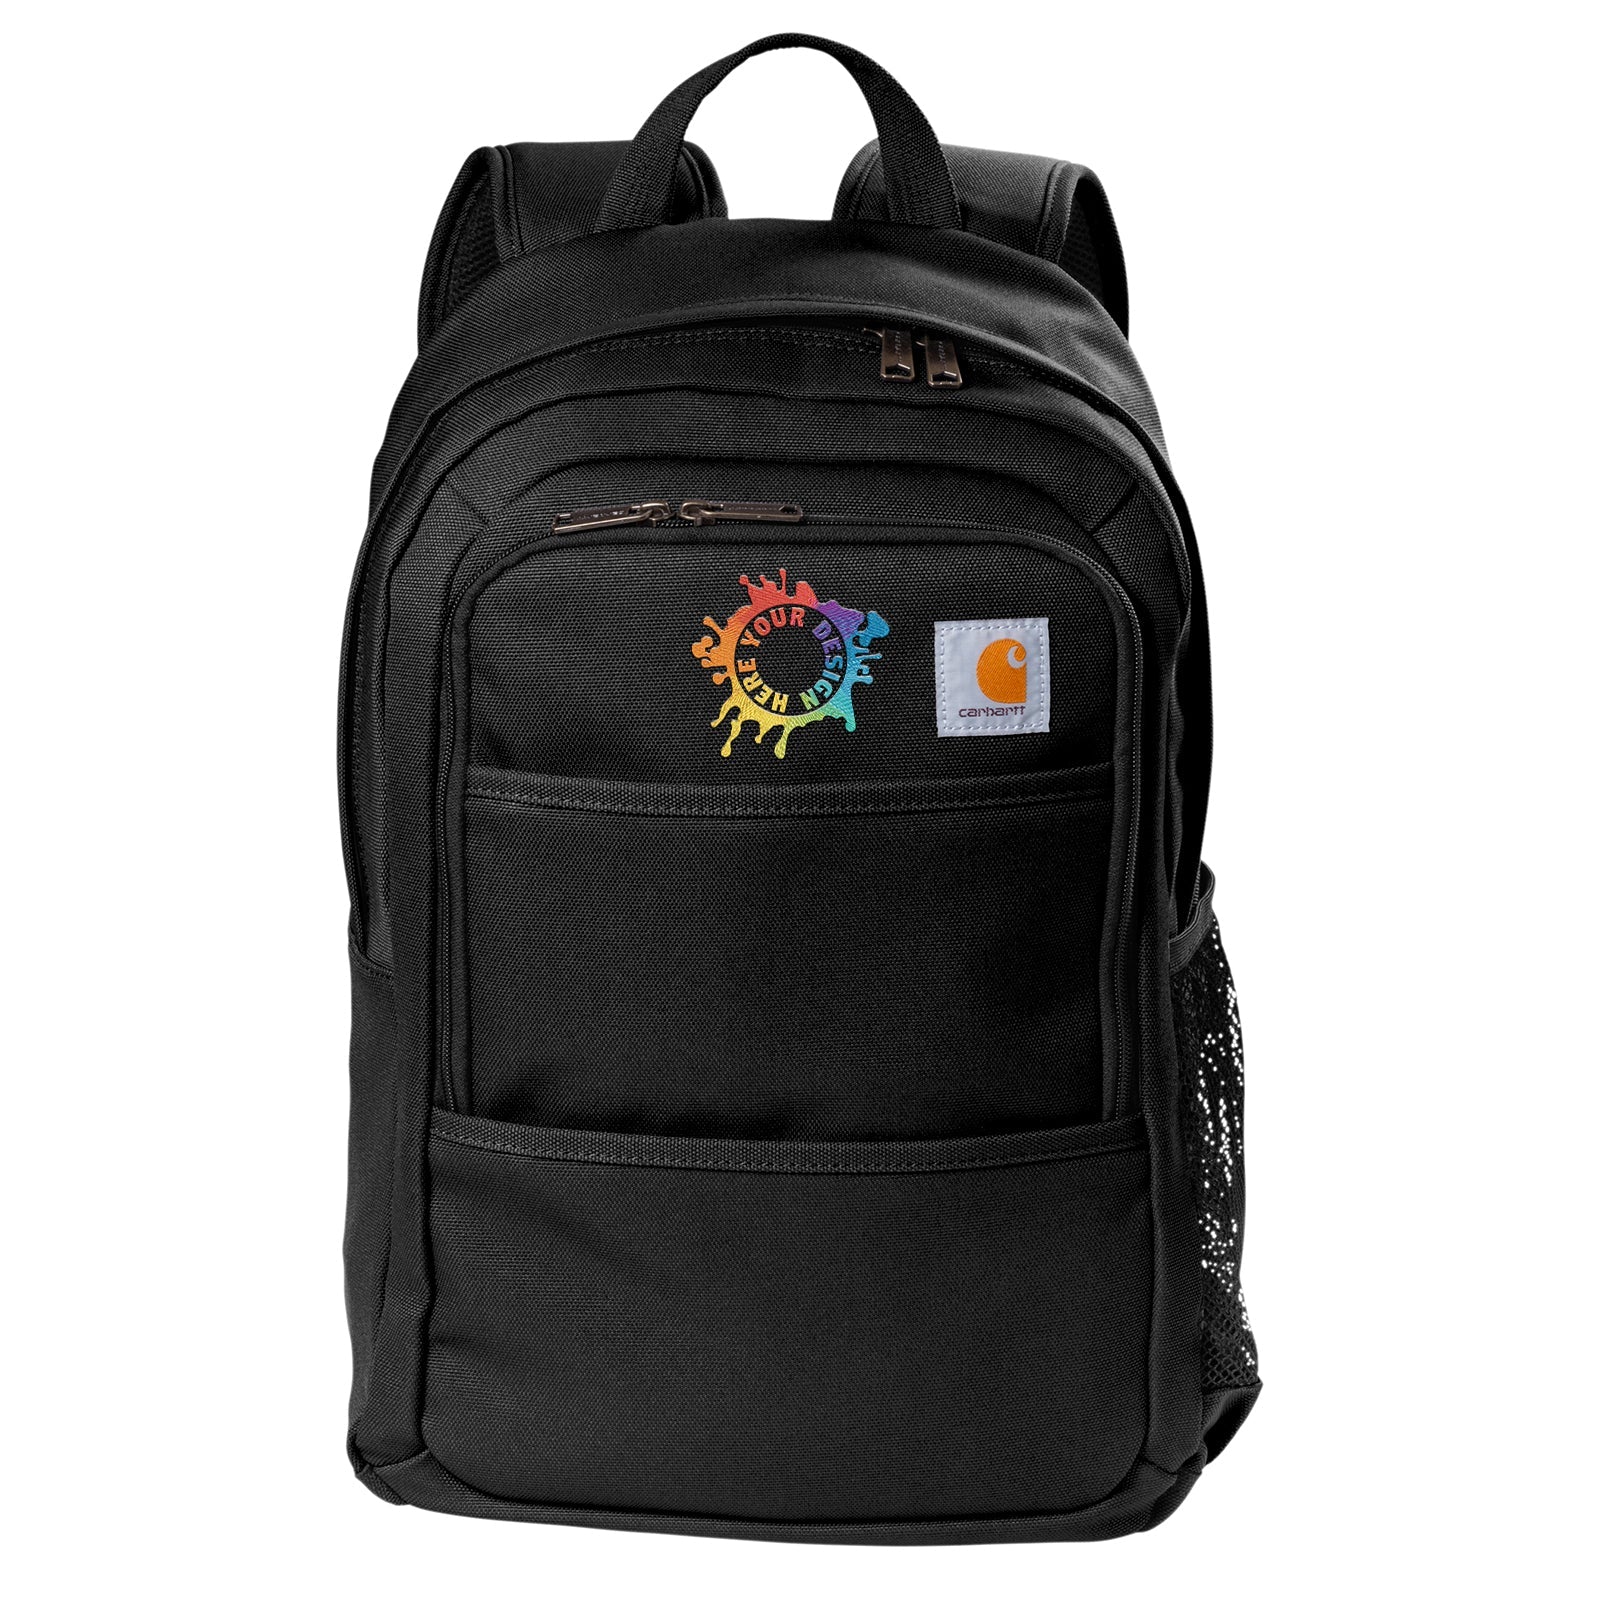 Carhartt Foundry Series Backpack Embroidery - Mato & Hash